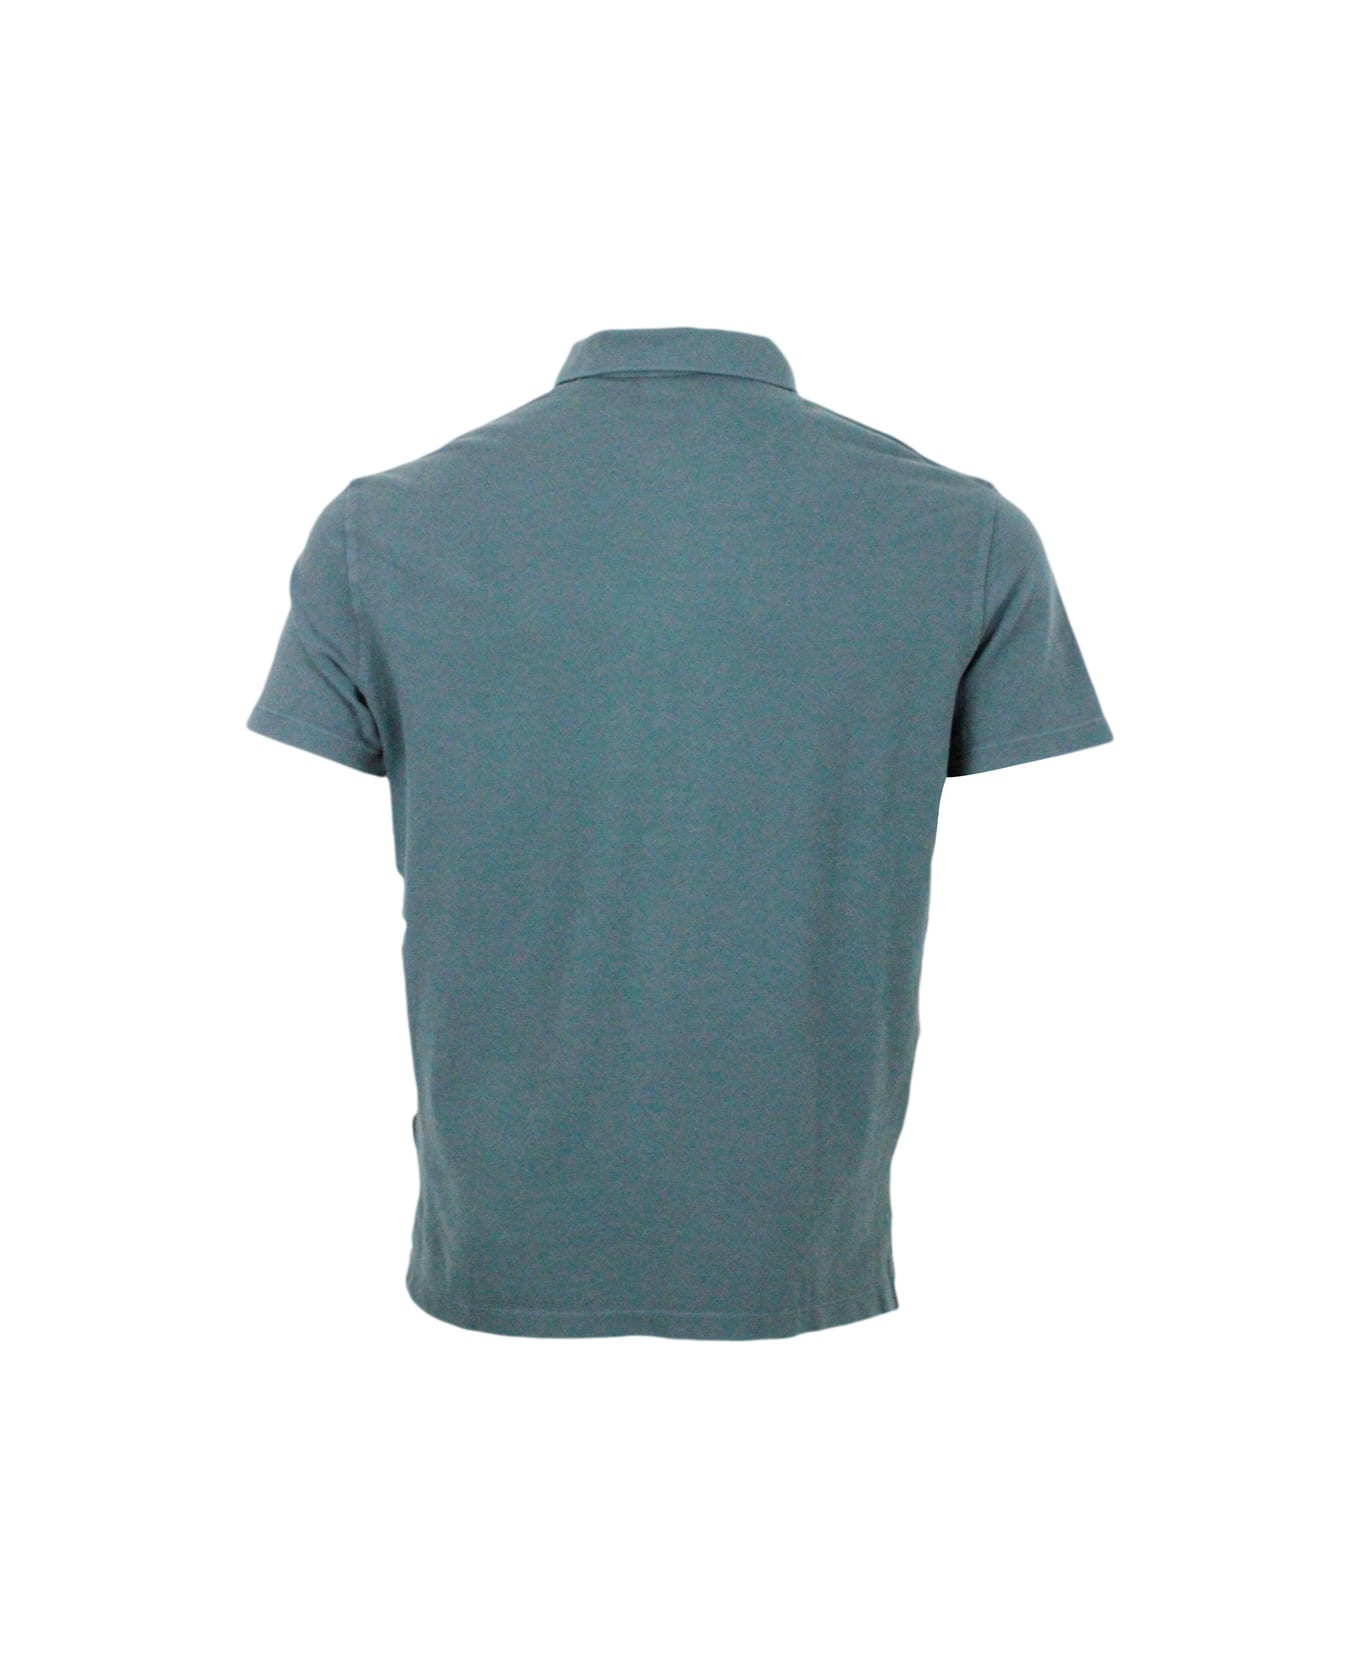 Armani Collezioni 3-button Short-sleeved Pique Cotton Polo Shirt With Logo Embroidered On The Chest - Green ポロシャツ